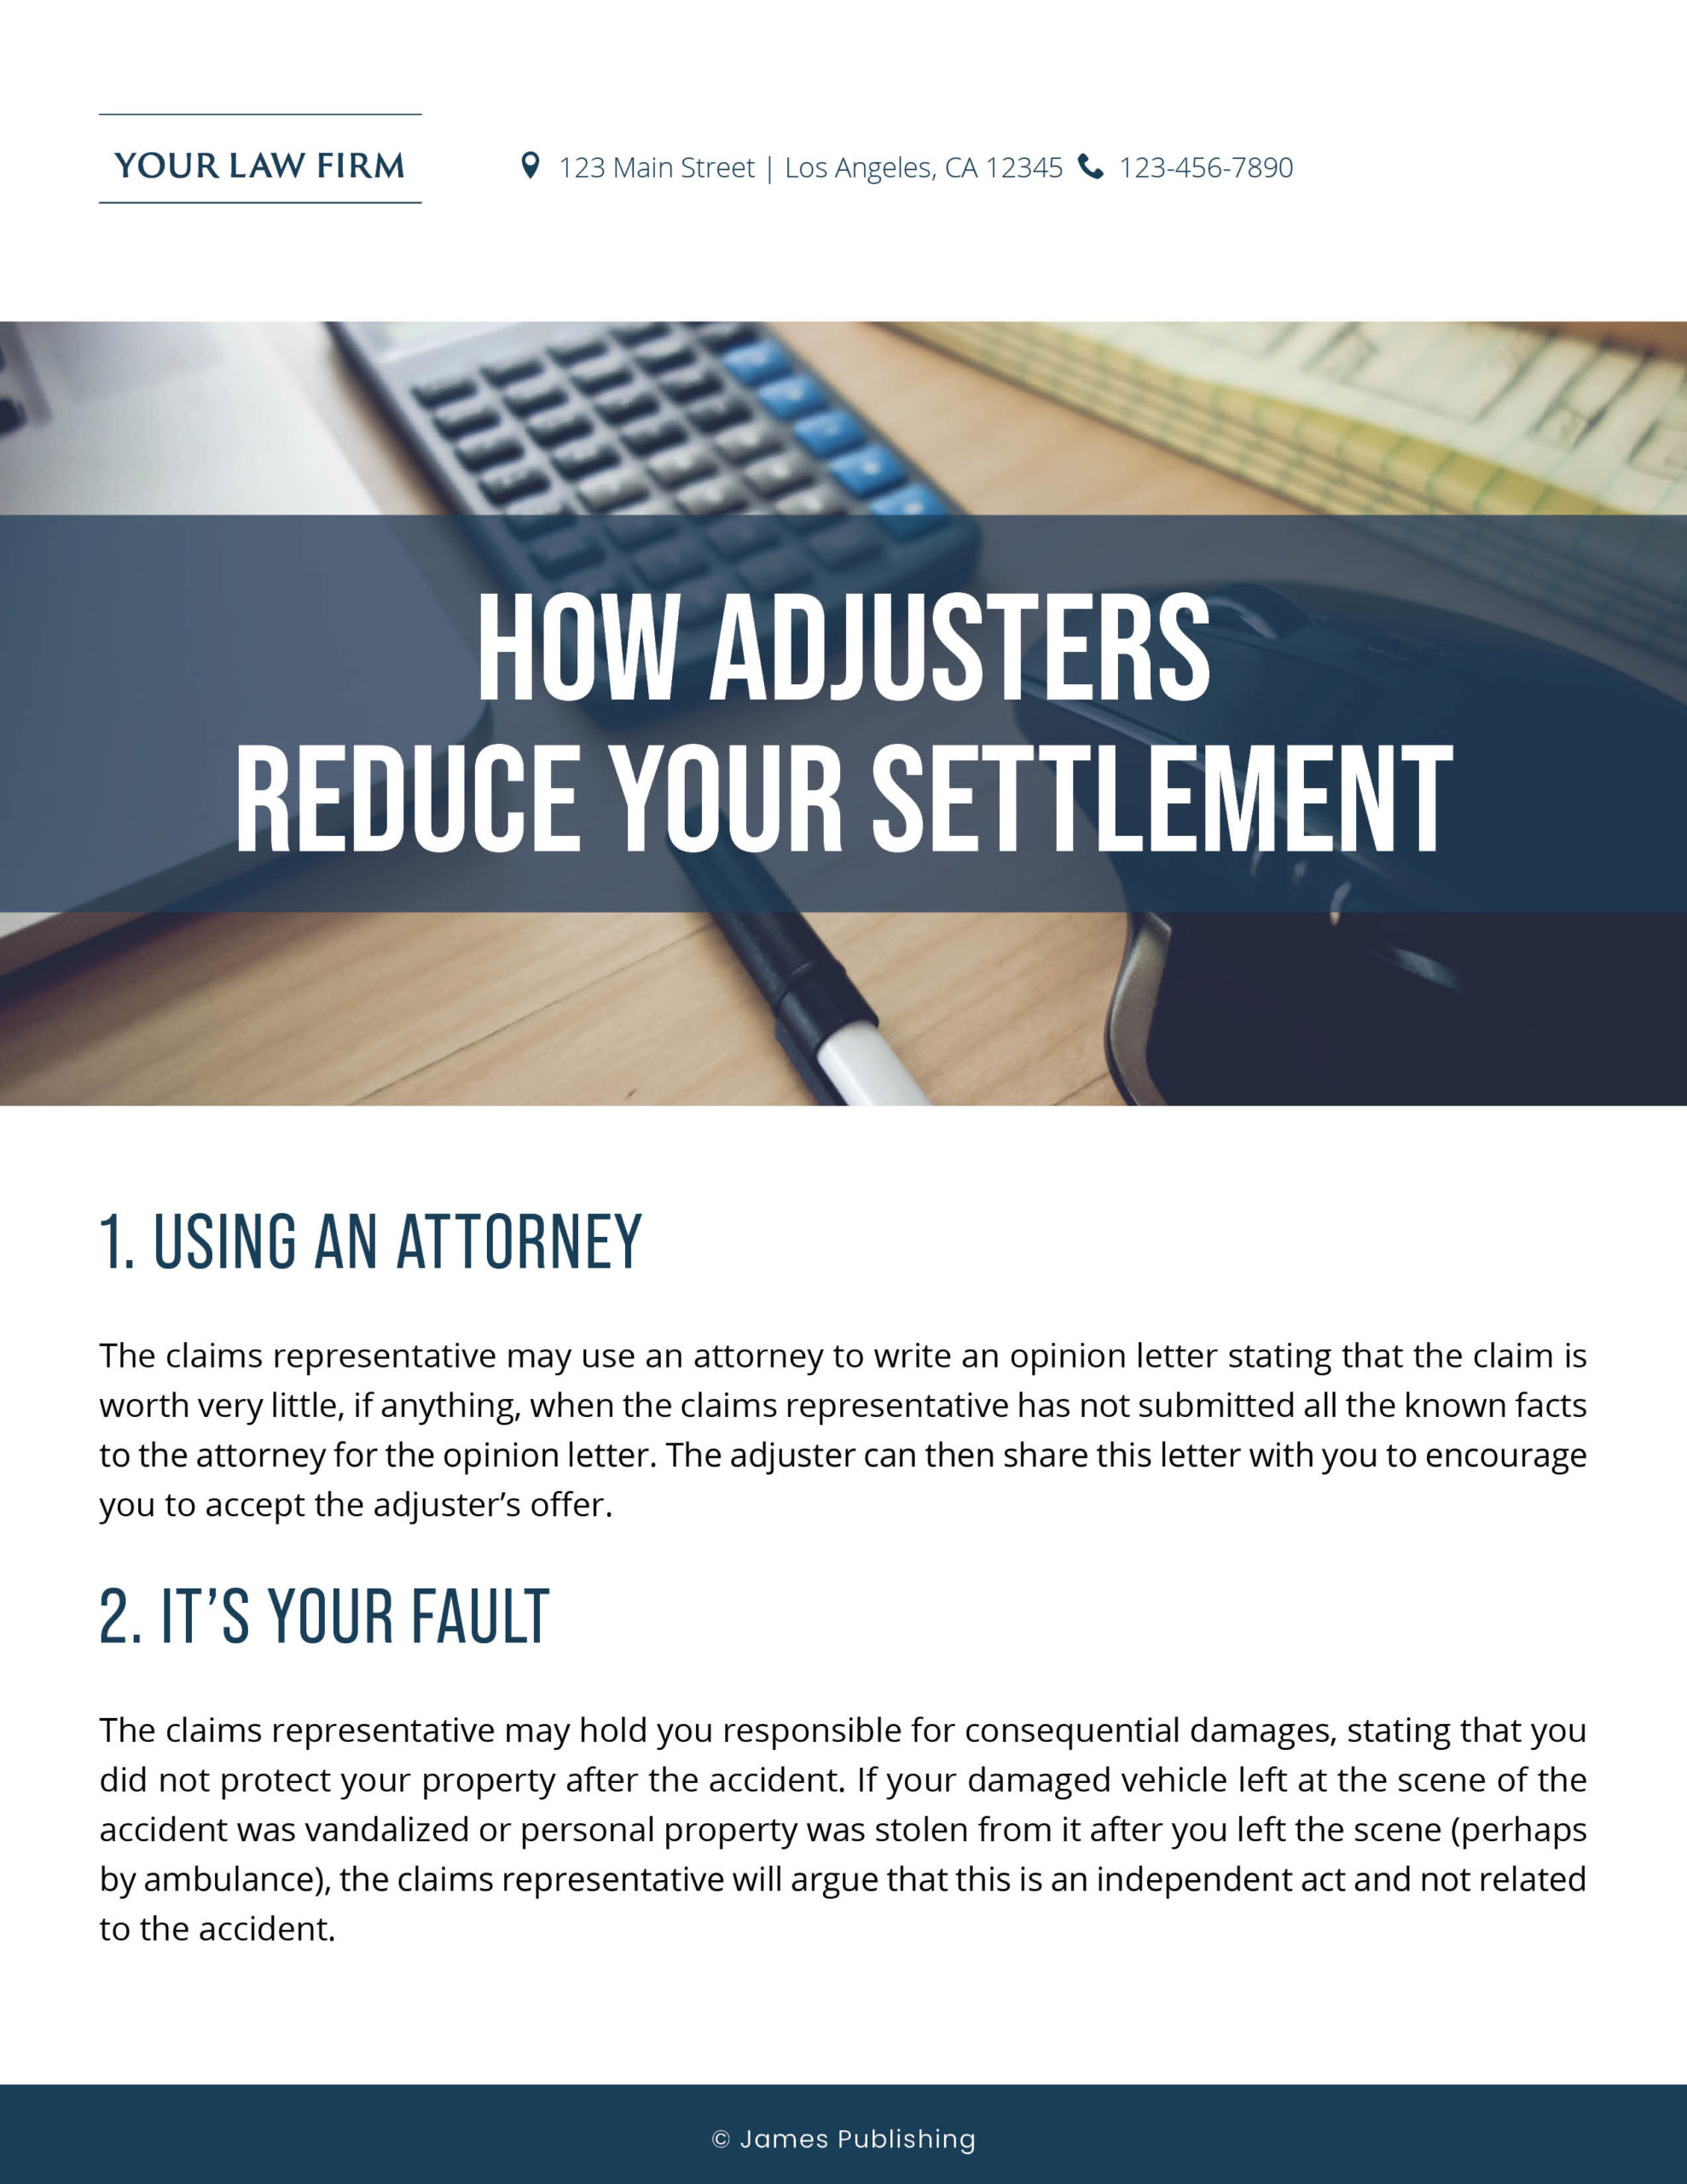 PI-04 How Adjusters Reduce Your Settlement